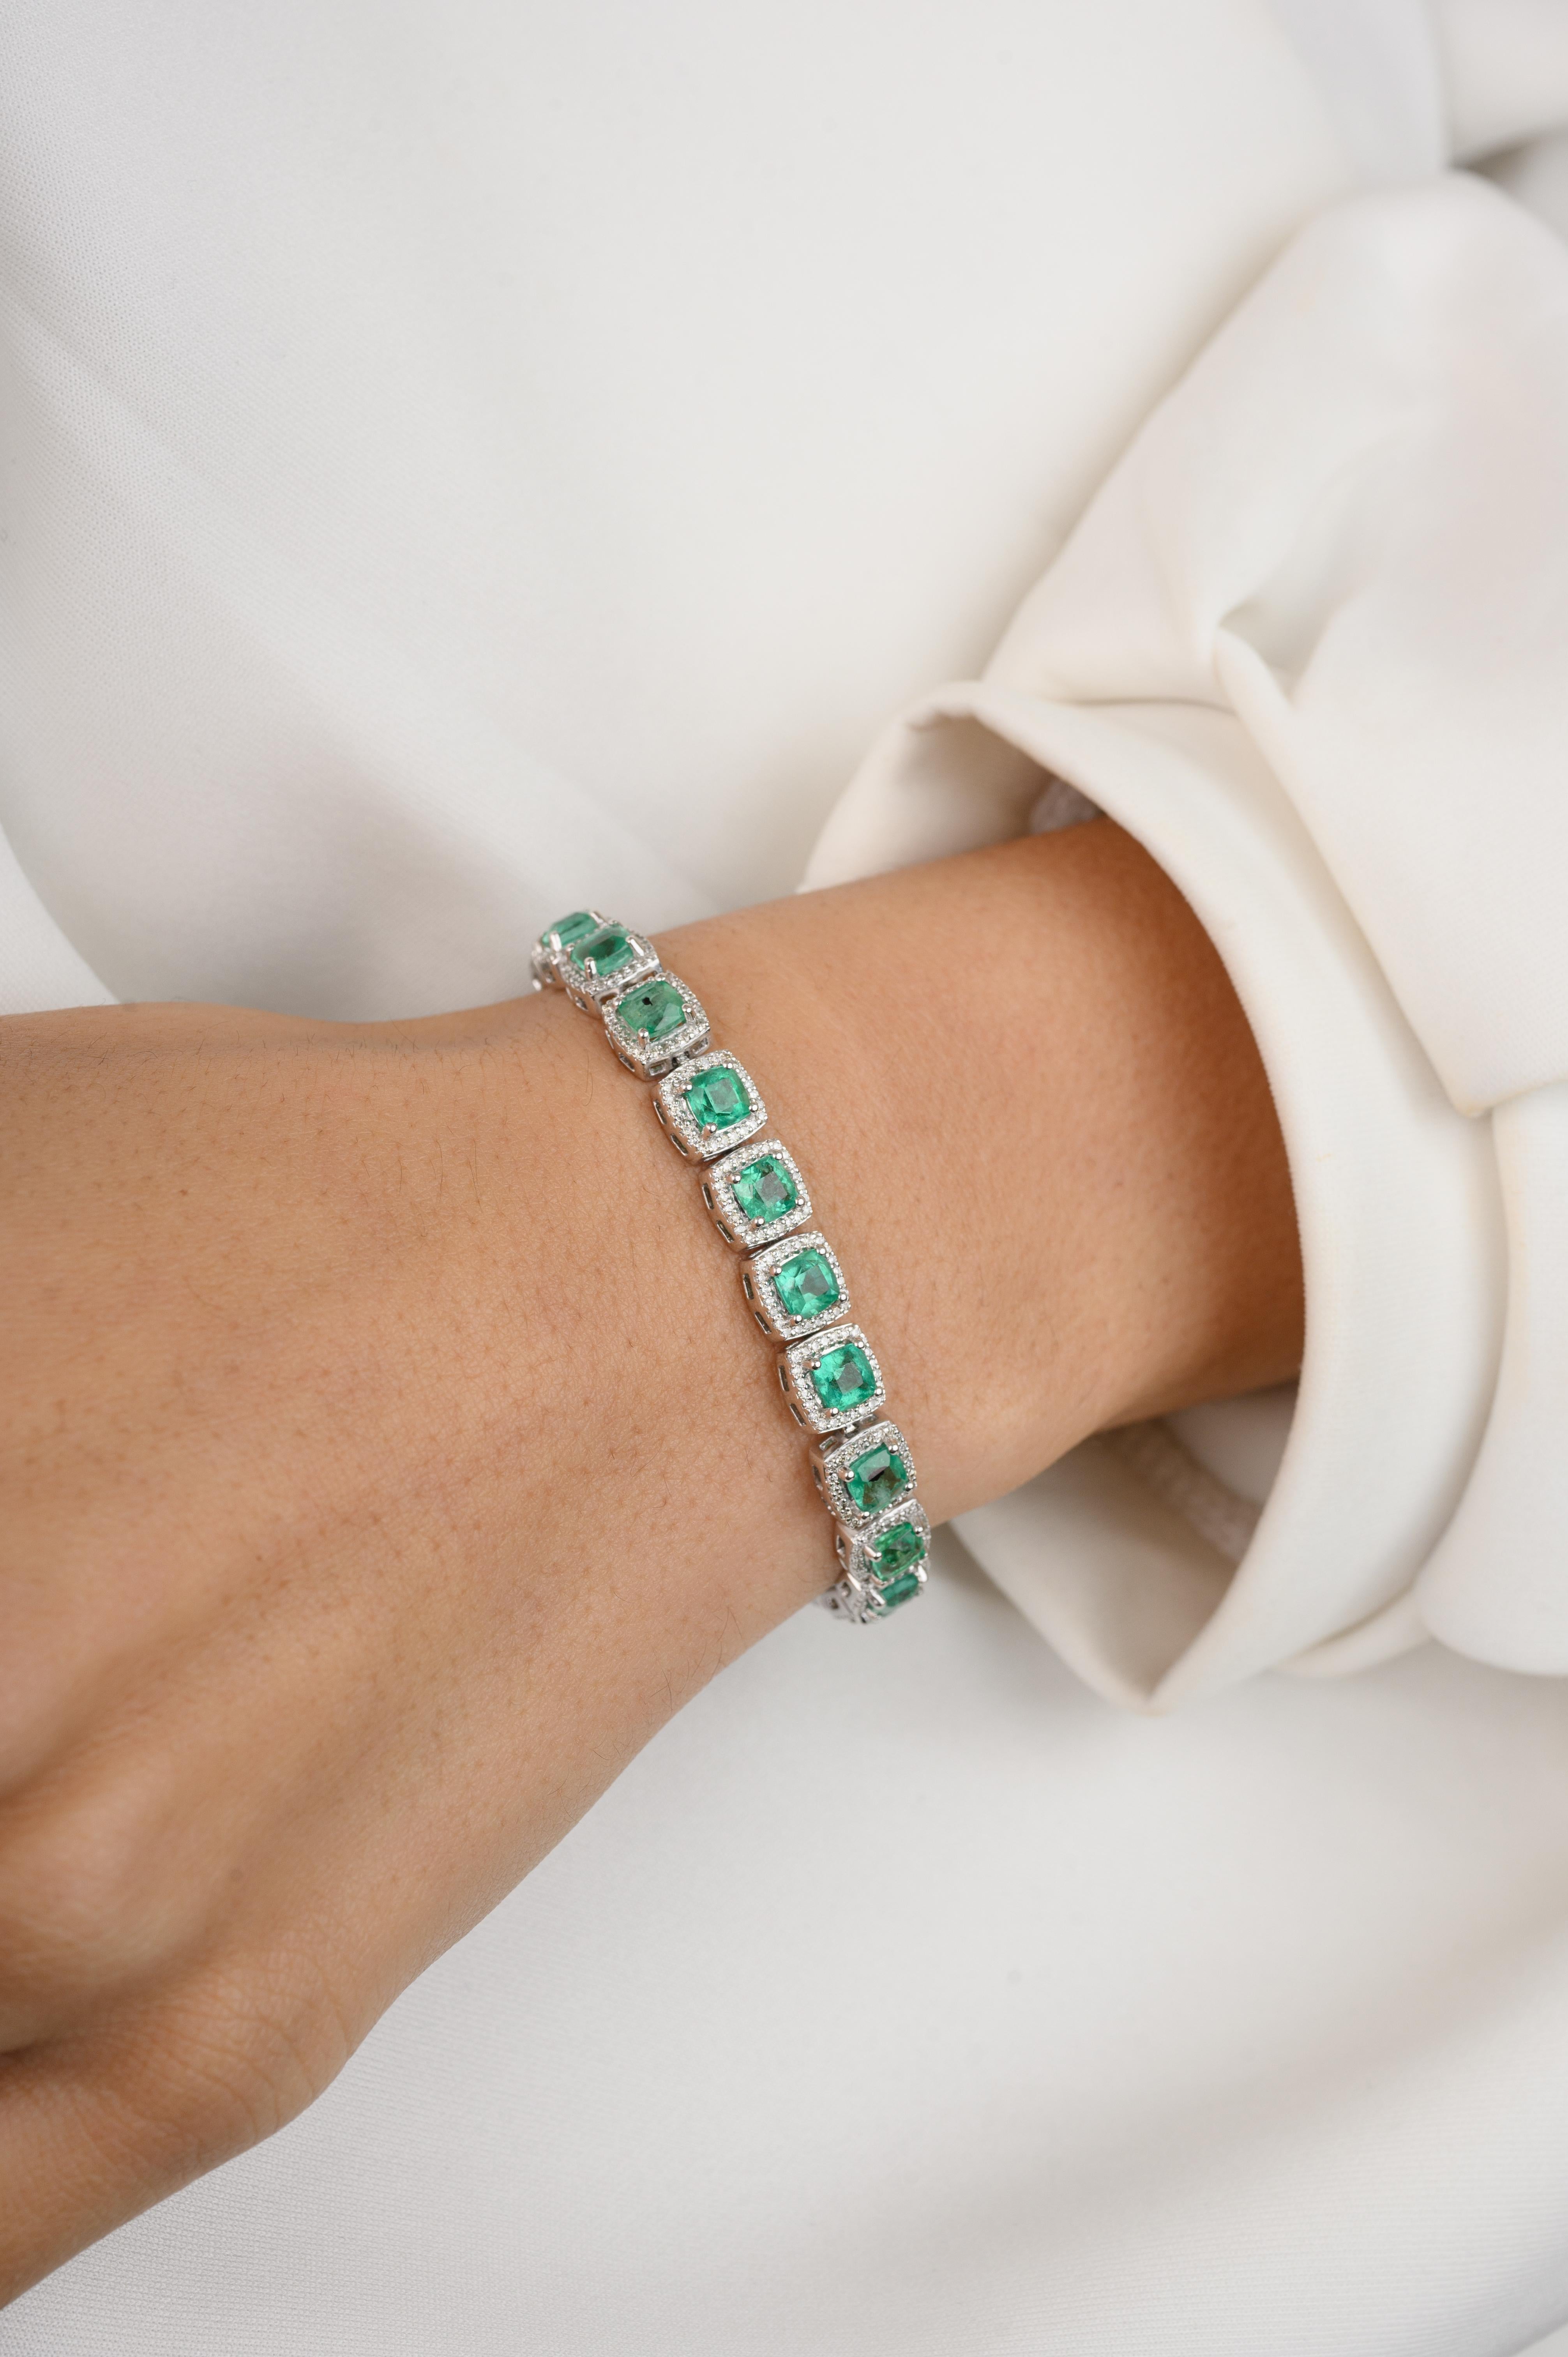 This Emerald Diamond Halo Engagement Bracelet in 18K gold showcases endlessly sparkling natural emerald, weighing 10.01 carat and diamonds weighing 1.61 carats. It measures 7 inches long in length. 
Emerald enhances intellectual capacity of the